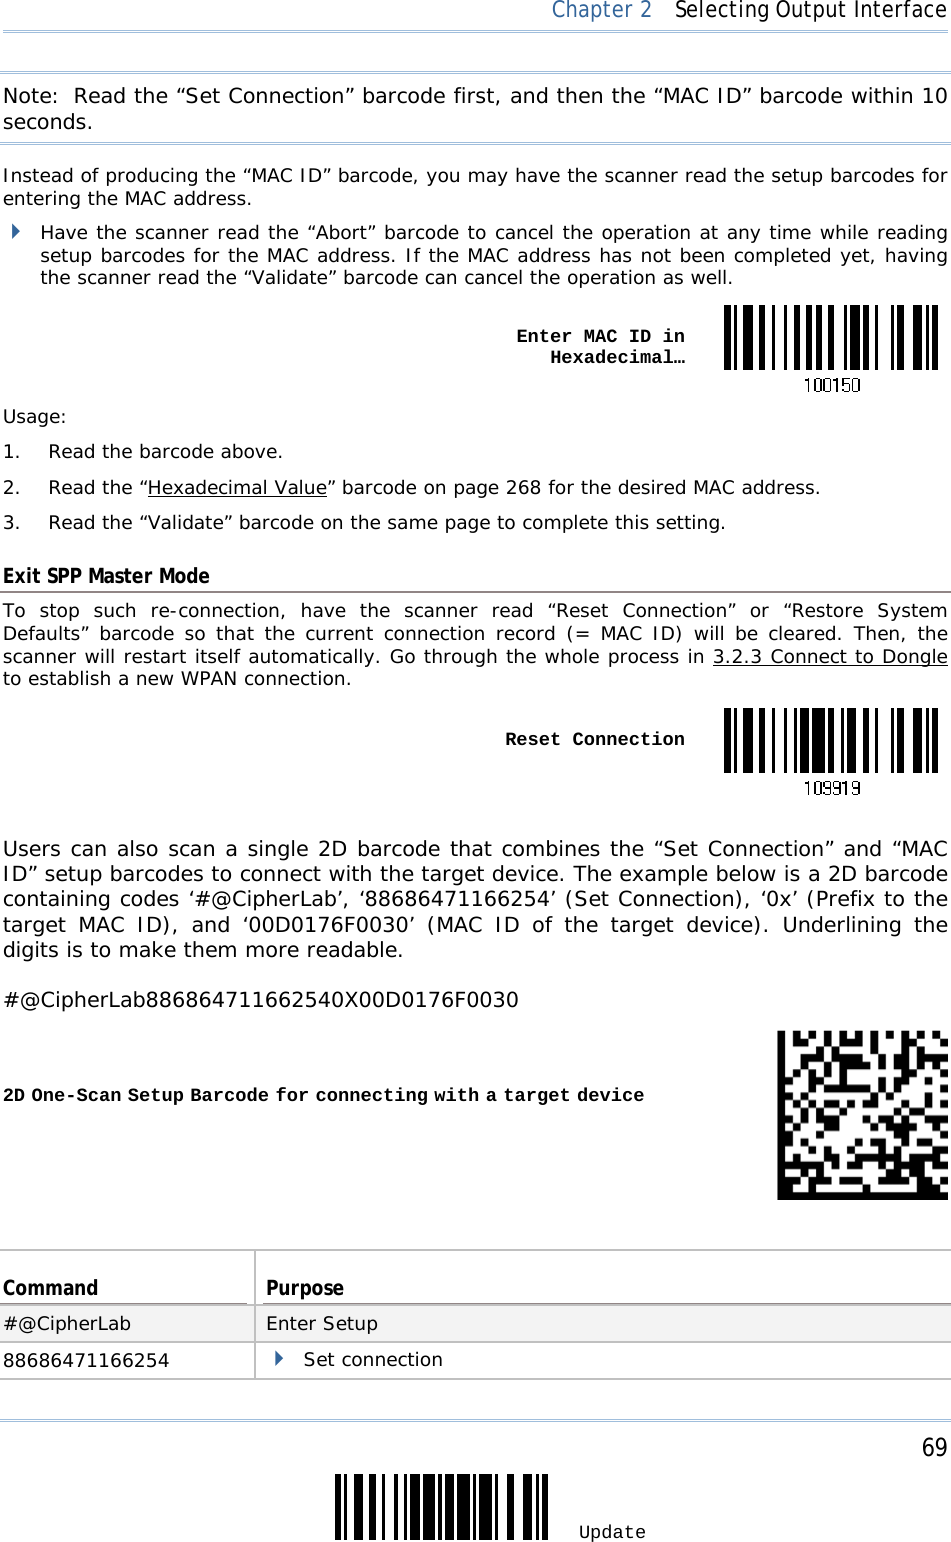     69 Update  Chapter 2  Selecting Output Interface Note:  Read the “Set Connection” barcode first, and then the “MAC ID” barcode within 10 seconds. Instead of producing the “MAC ID” barcode, you may have the scanner read the setup barcodes for entering the MAC address.  Have the scanner read the “Abort” barcode to cancel the operation at any time while reading setup barcodes for the MAC address. If the MAC address has not been completed yet, having the scanner read the “Validate” barcode can cancel the operation as well.  Enter MAC ID in Hexadecimal…Usage:  1.  Read the barcode above. 2.  Read the “Hexadecimal Value” barcode on page 268 for the desired MAC address. 3.  Read the “Validate” barcode on the same page to complete this setting. Exit SPP Master Mode To stop such re-connection, have the scanner read “Reset Connection” or “Restore System Defaults” barcode so that the current connection record (= MAC ID) will be cleared. Then, the scanner will restart itself automatically. Go through the whole process in 3.2.3 Connect to Dongle to establish a new WPAN connection.  Reset Connection Users can also scan a single 2D barcode that combines the “Set Connection” and “MAC ID” setup barcodes to connect with the target device. The example below is a 2D barcode containing codes ‘#@CipherLab’, ‘88686471166254’ (Set Connection), ‘0x’ (Prefix to the target MAC ID), and ‘00D0176F0030’ (MAC ID of the target device). Underlining the digits is to make them more readable. #@CipherLab886864711662540X00D0176F0030 2D One-Scan Setup Barcode for connecting with a target device Command  Purpose #@CipherLab  Enter Setup 88686471166254   Set connection 